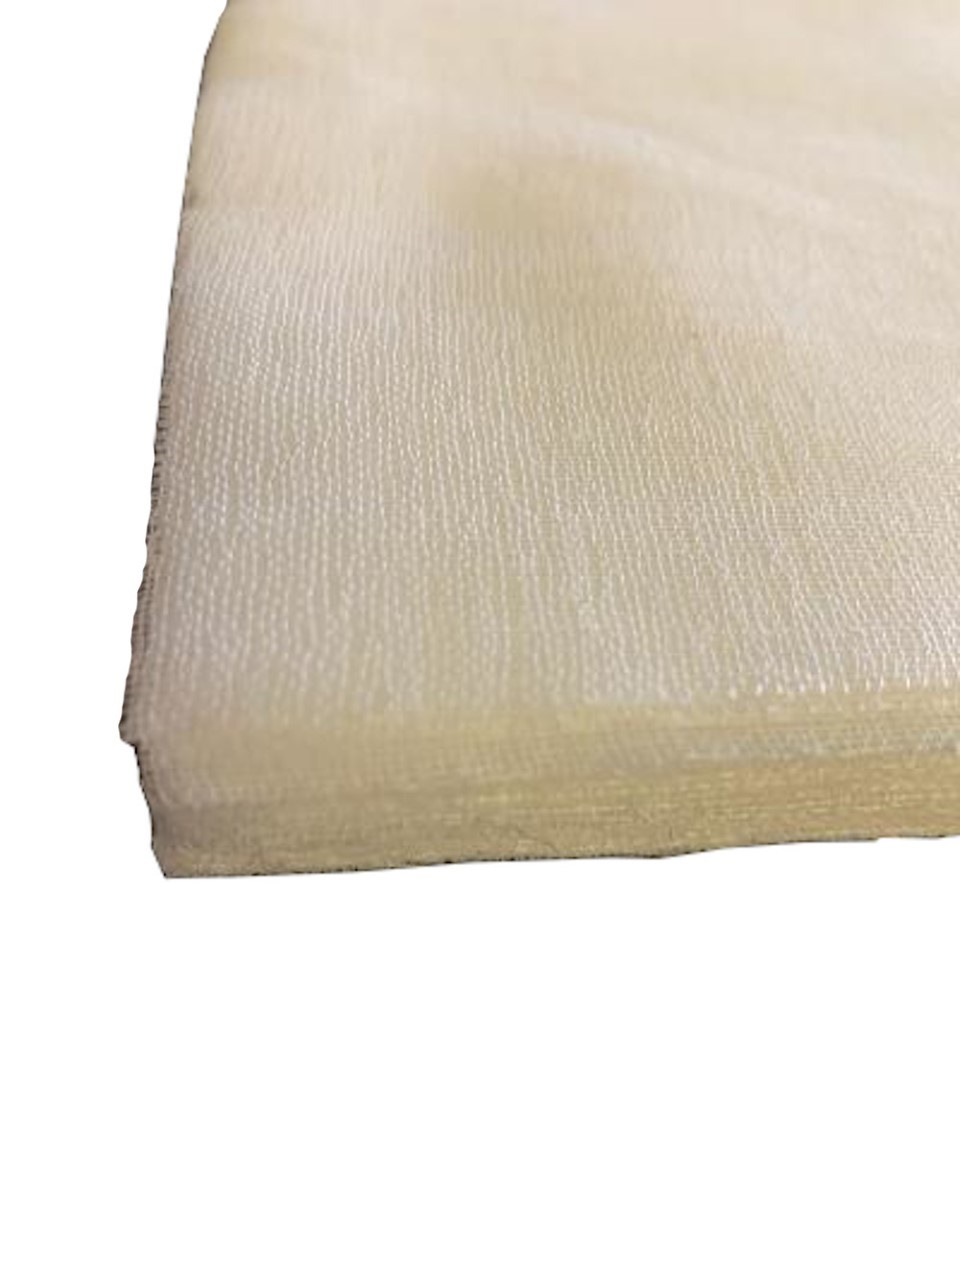 12" x 12" Grade 90 Cheesecloth Bleached Squares 100 Pk